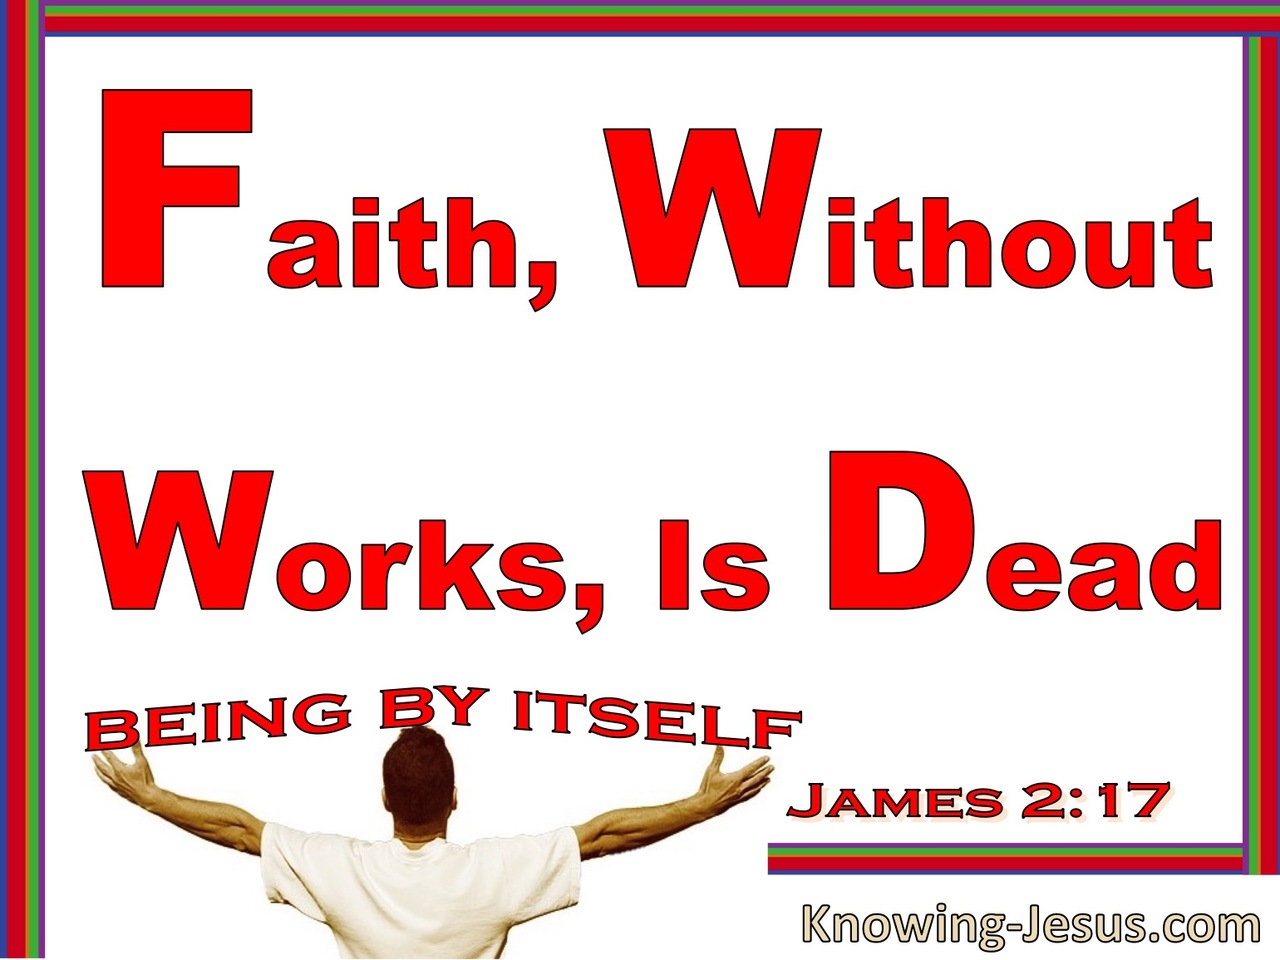 James 2:17 Faith Without Works Is Dead (red)